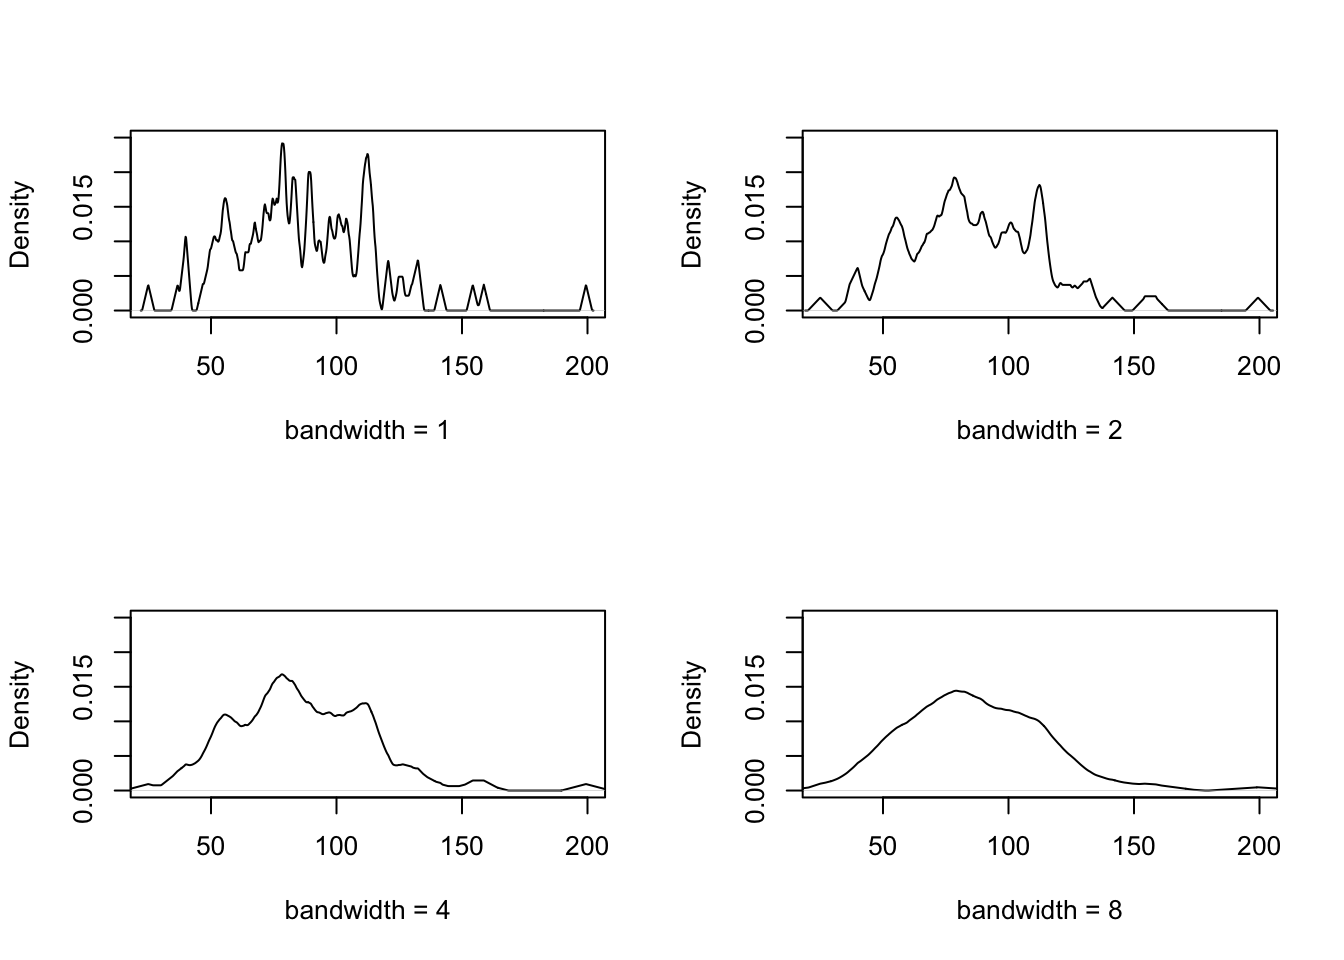 This figure illustrates how the bandwidth of a kernel density estimate can be controlled in R.